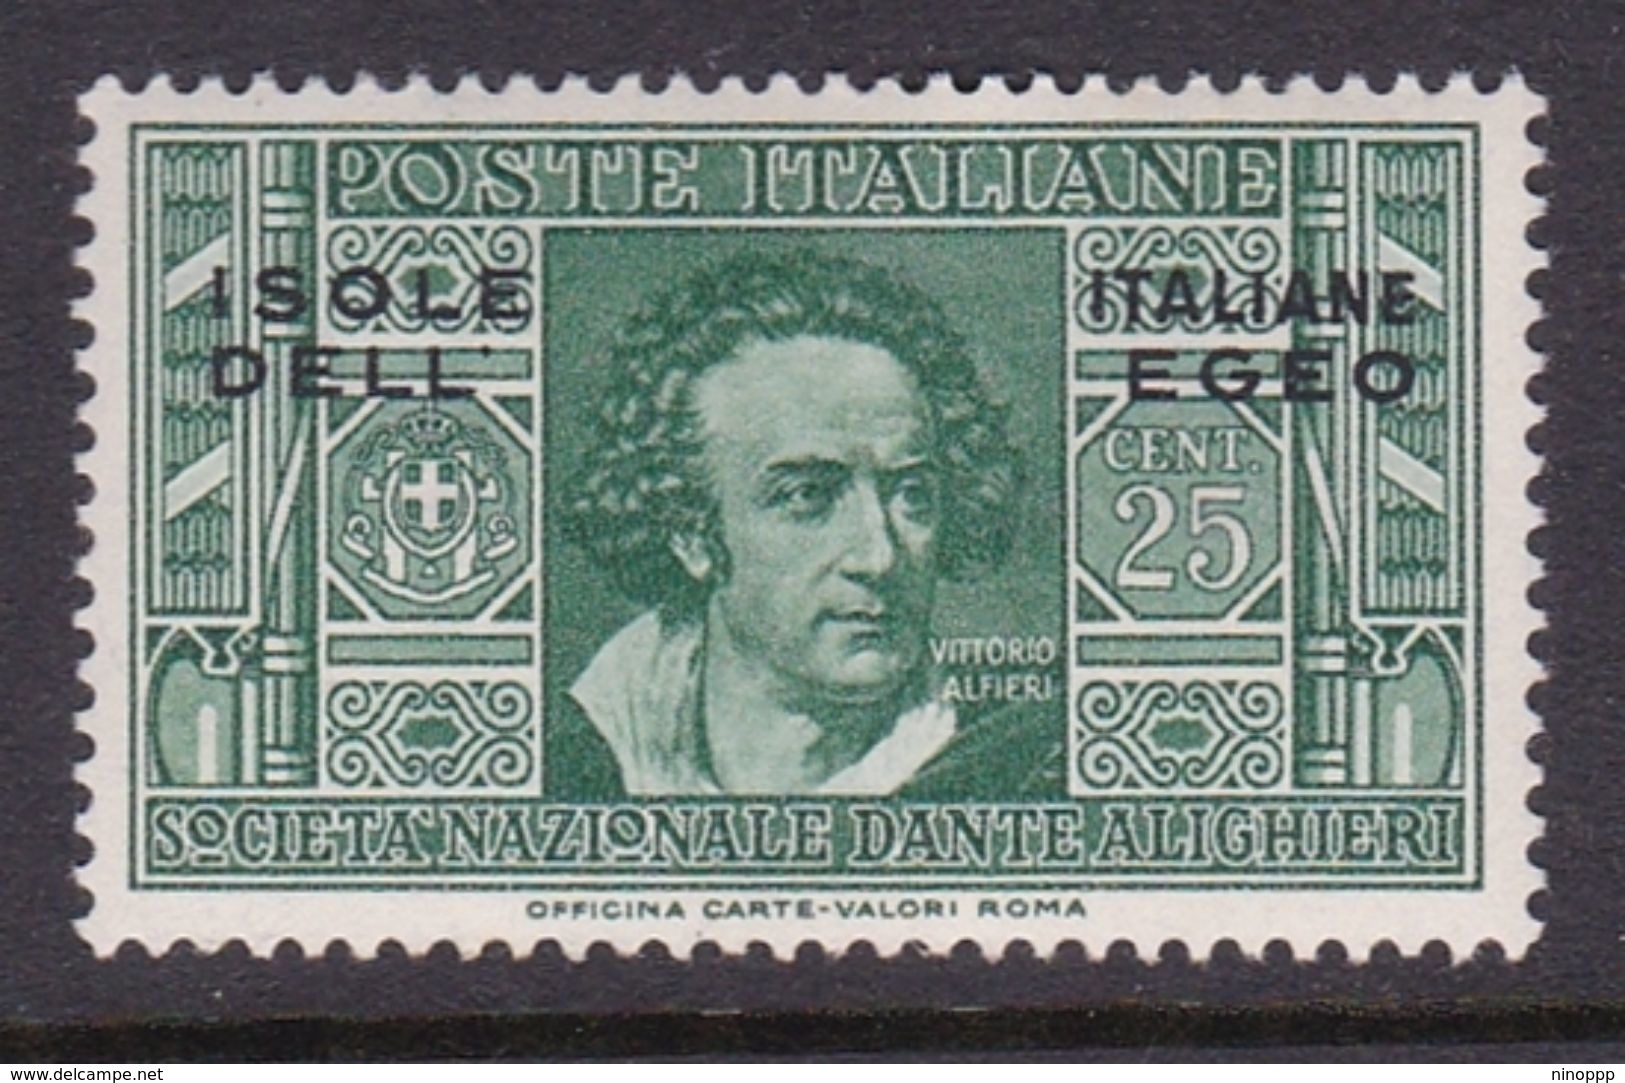 Italy-Colonies And Territories-Aegean General Issue-Rodi S47 1932 Dante Alighieri 25c Green MH - General Issues